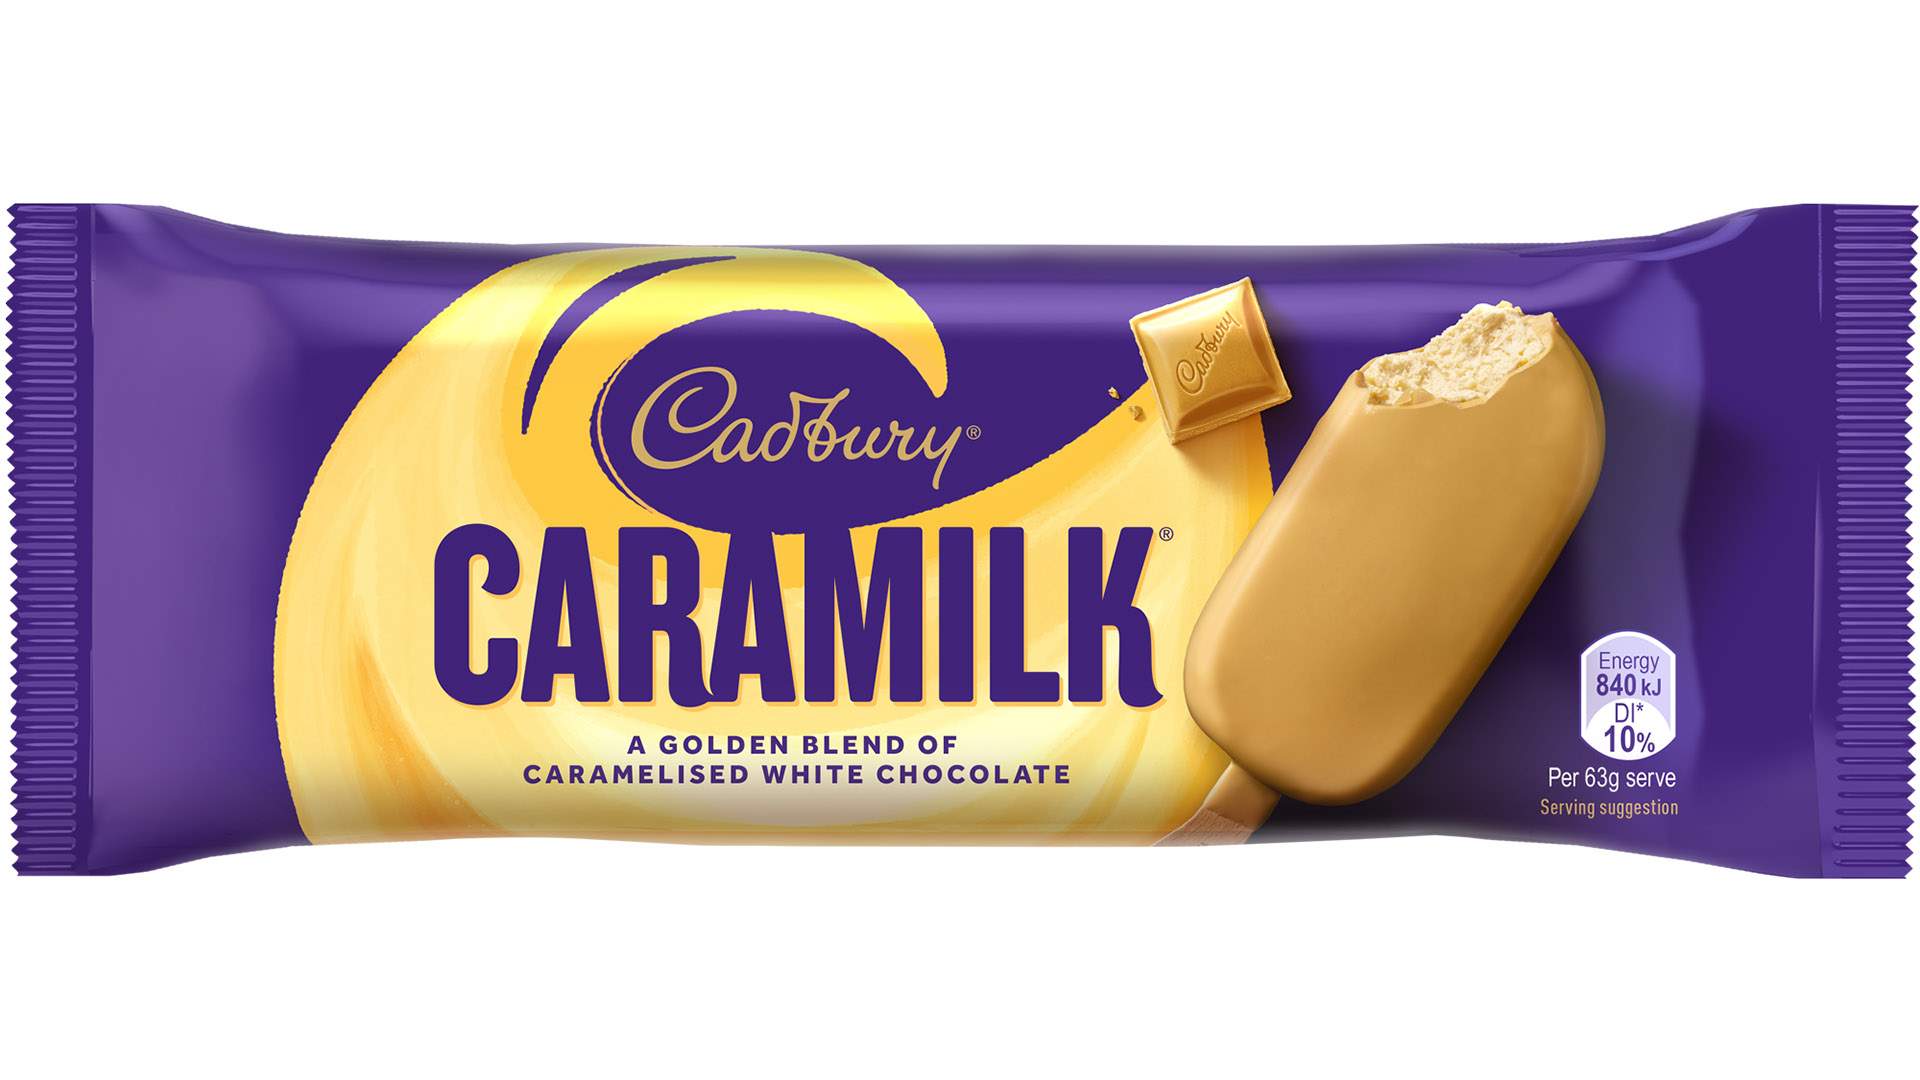 Cadbury's New Caramilk Ice Creams Have Just Landed in the Freezer Aisle